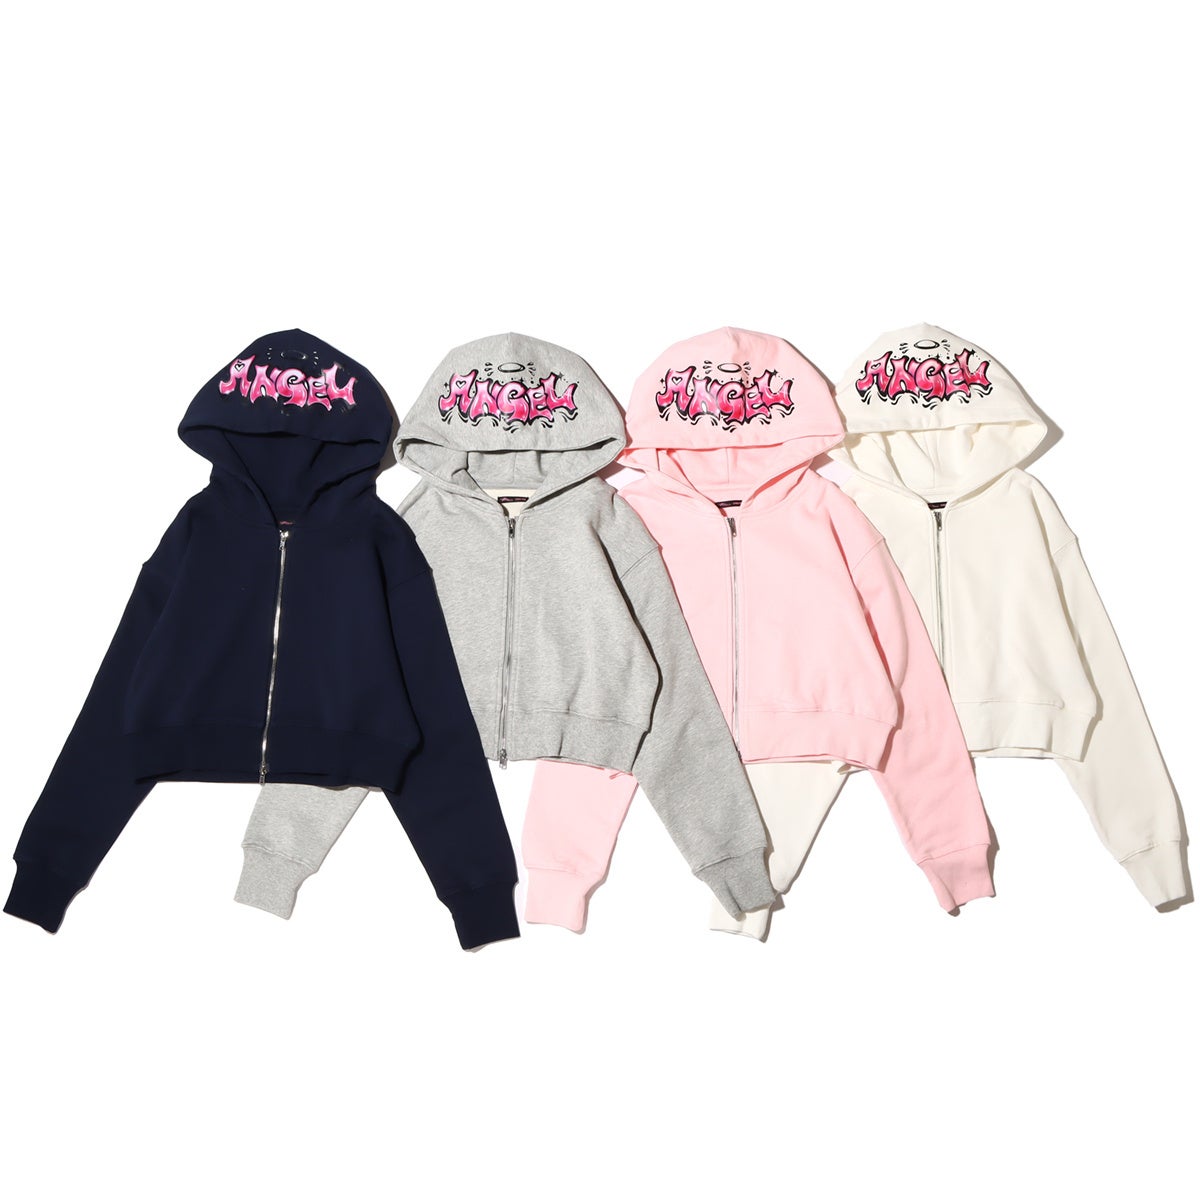 RIEHATA × atmos pink 22AW APPAREL COLLECTION 待望のコラボレーションアイテムが今季も登場！のサブ画像6